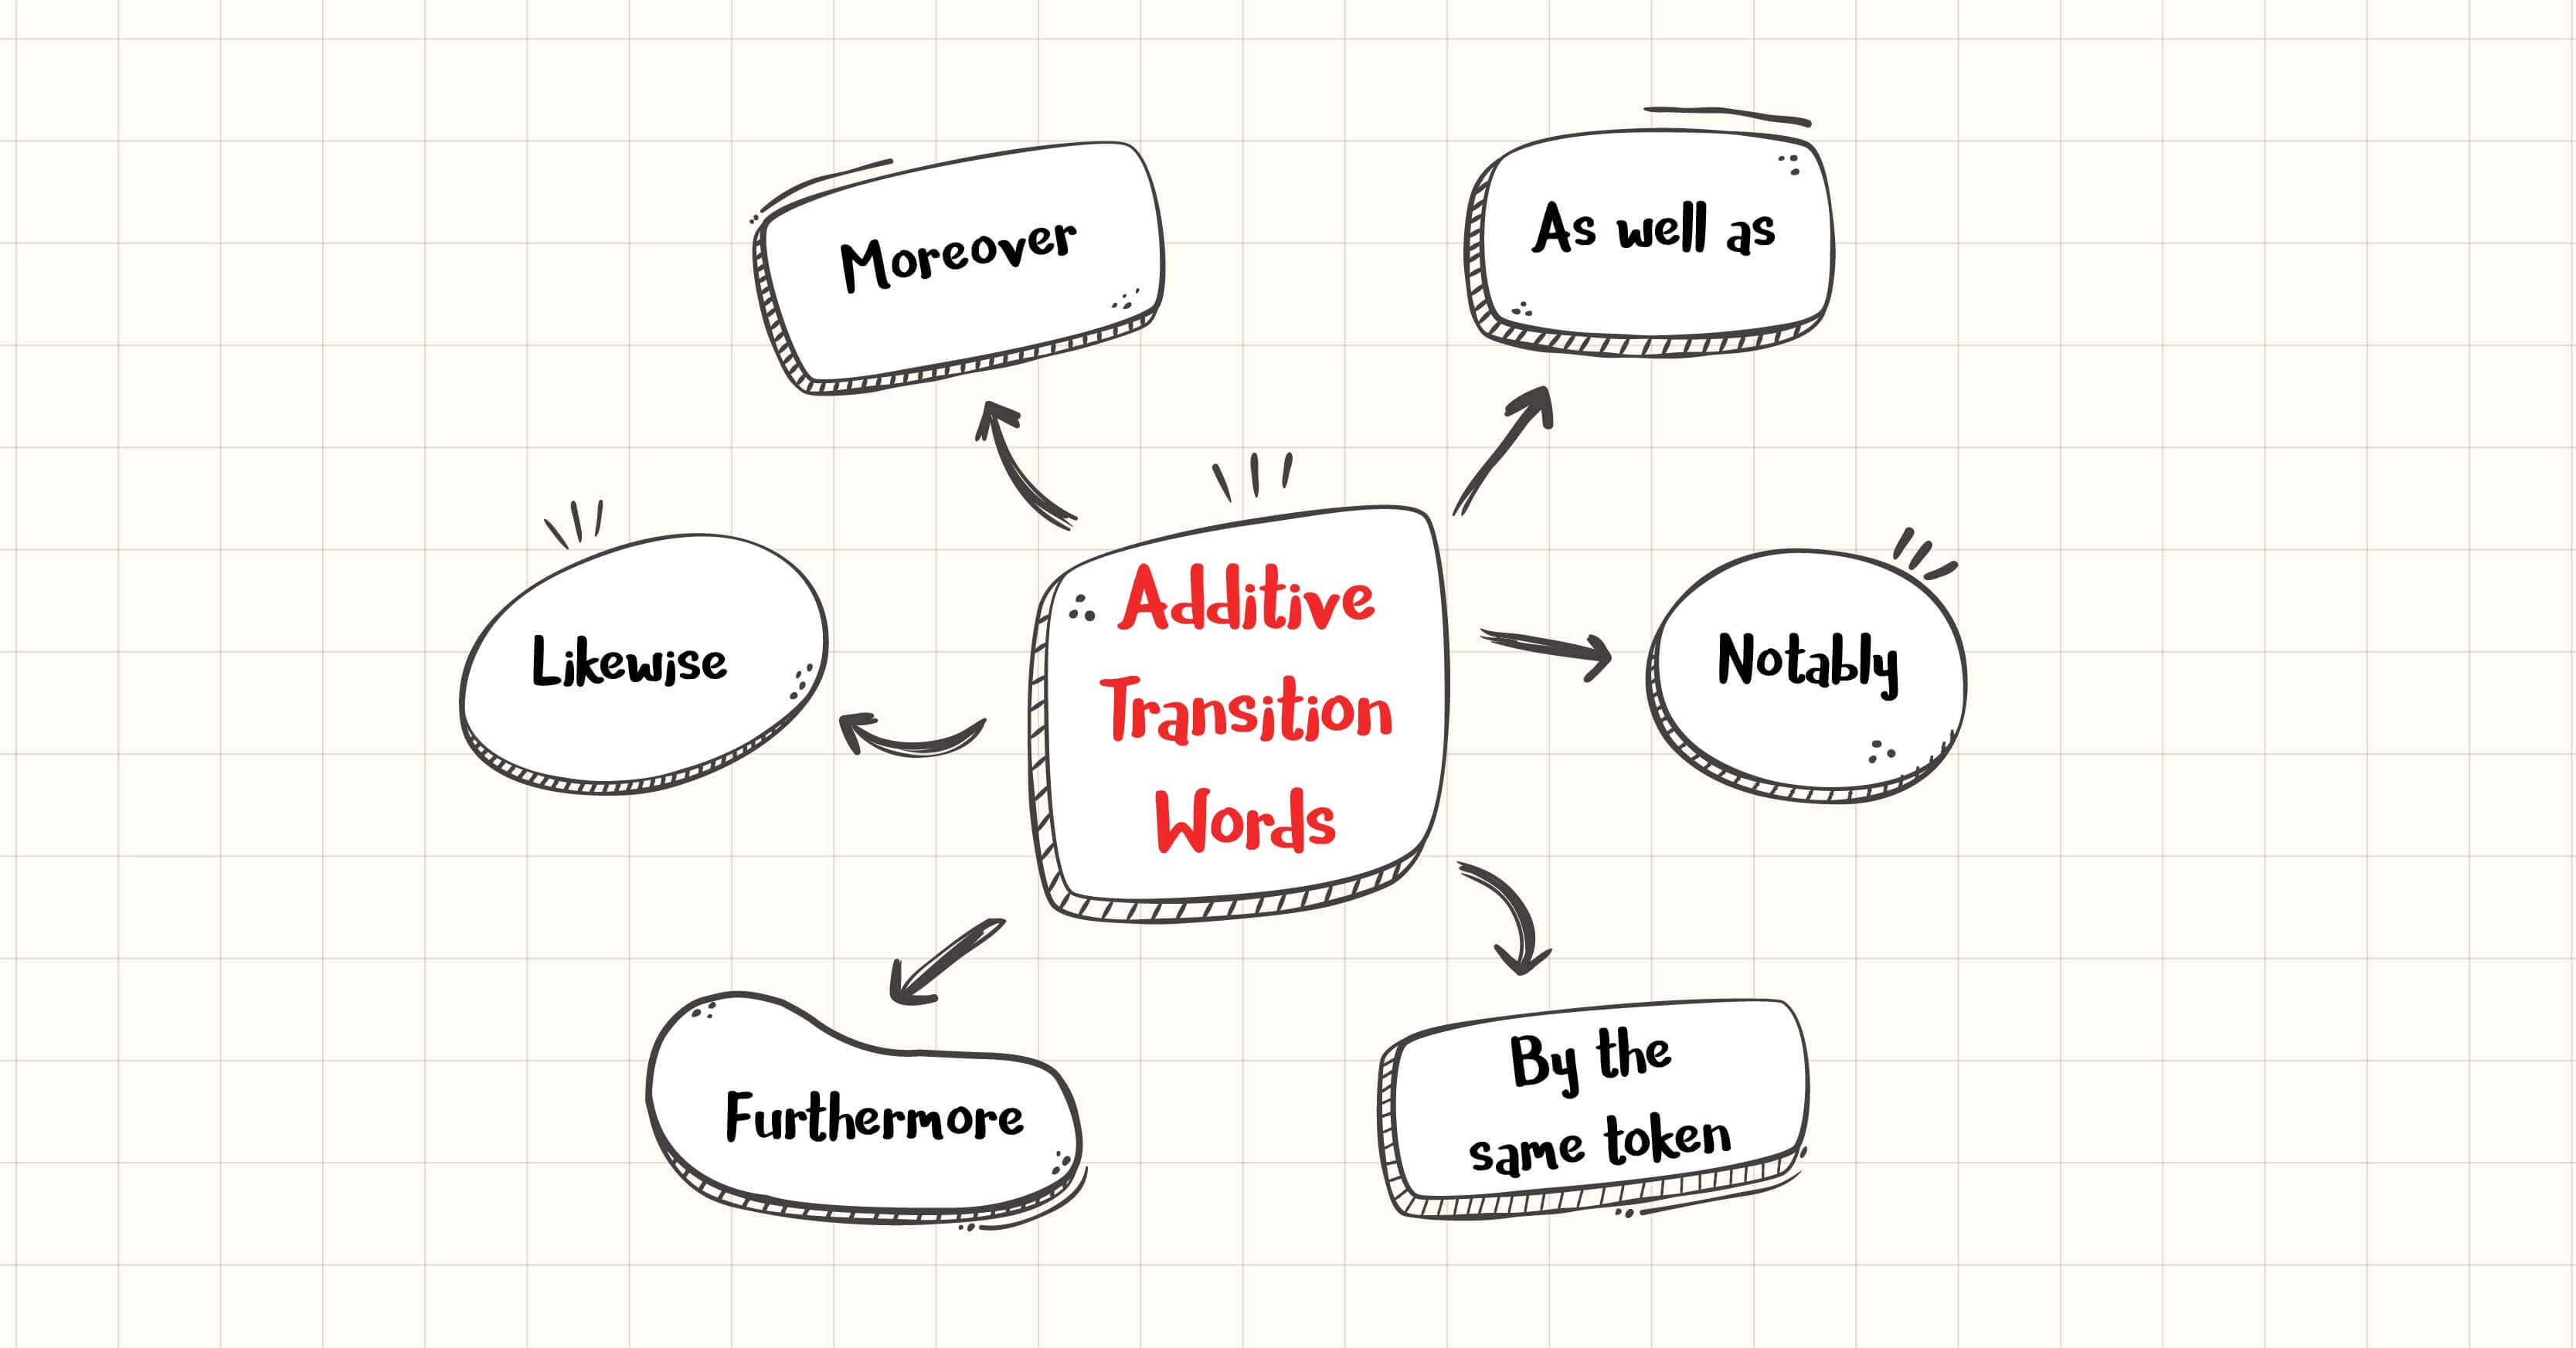 tu-noi-bo-sung-additive-transition-words-trong-ielts-writing